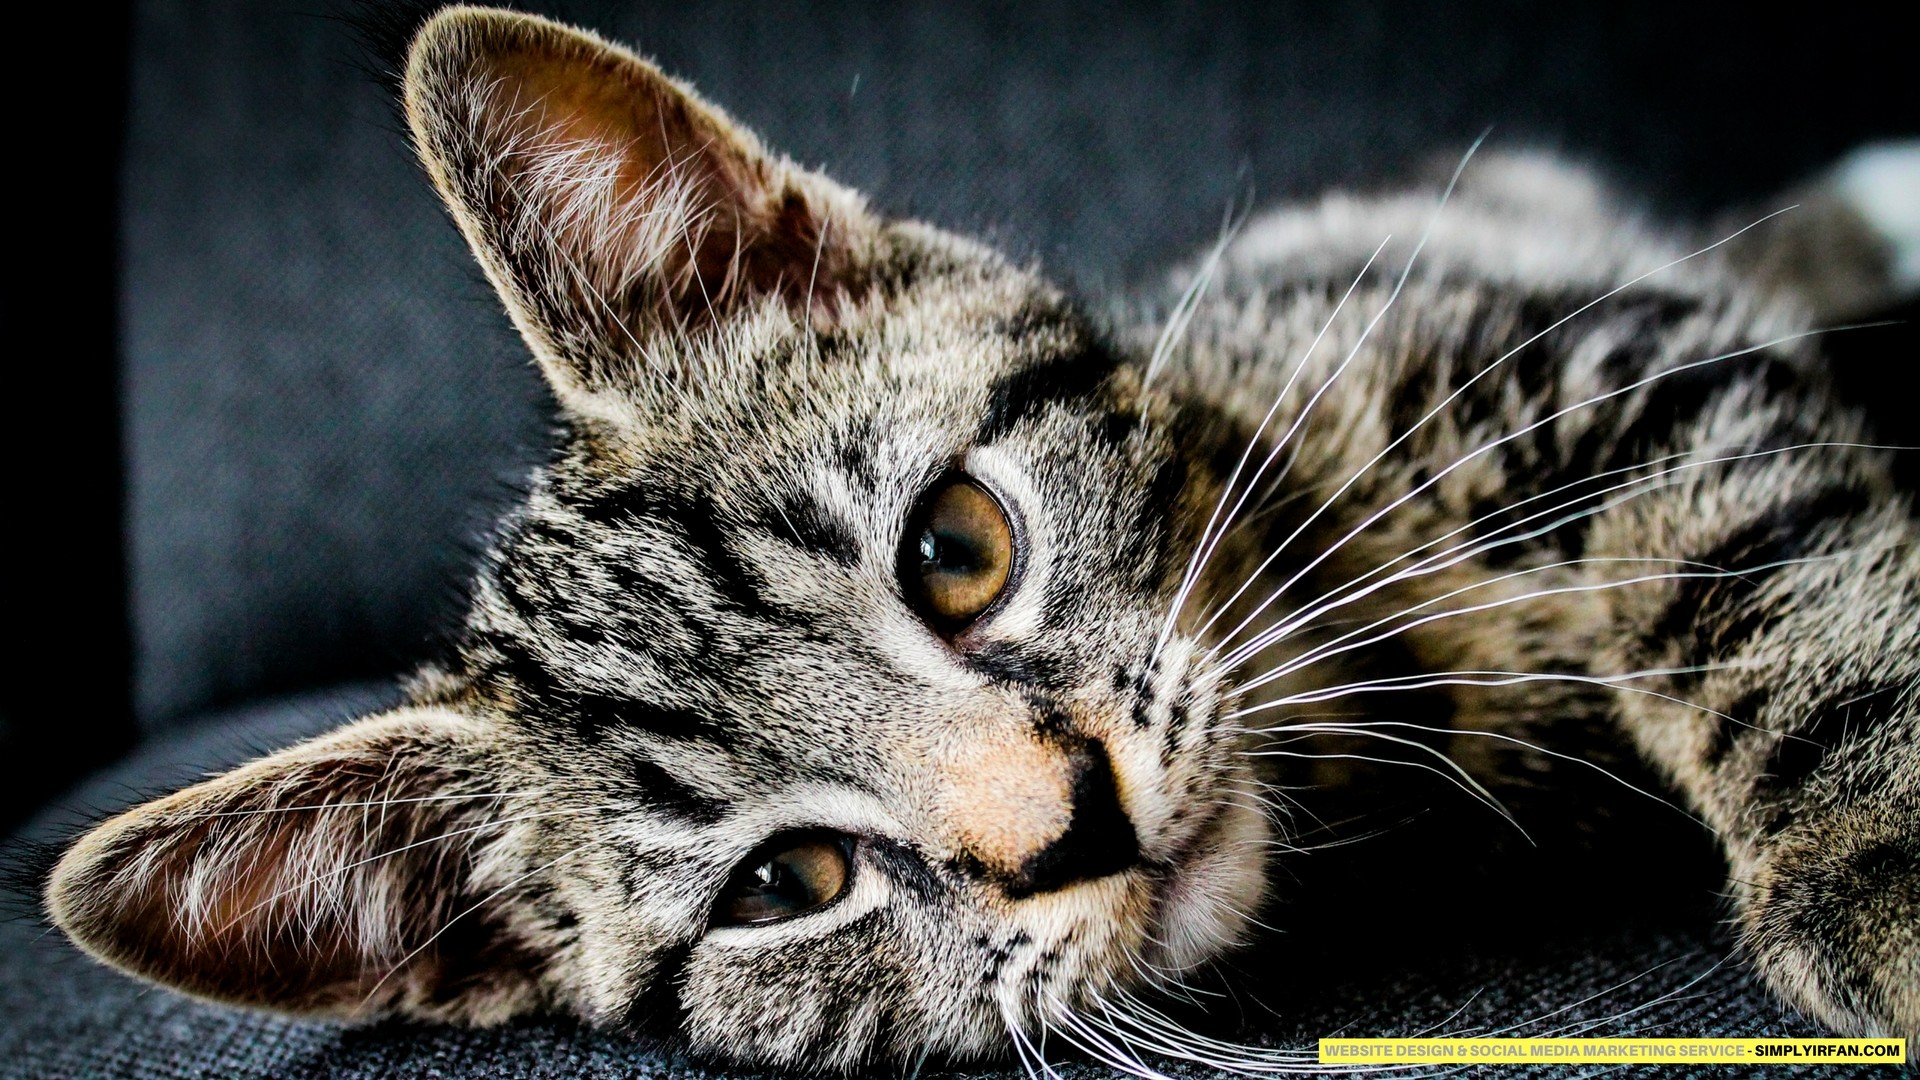 HD Cat Wallpapers 1920x1080 (69+ images)